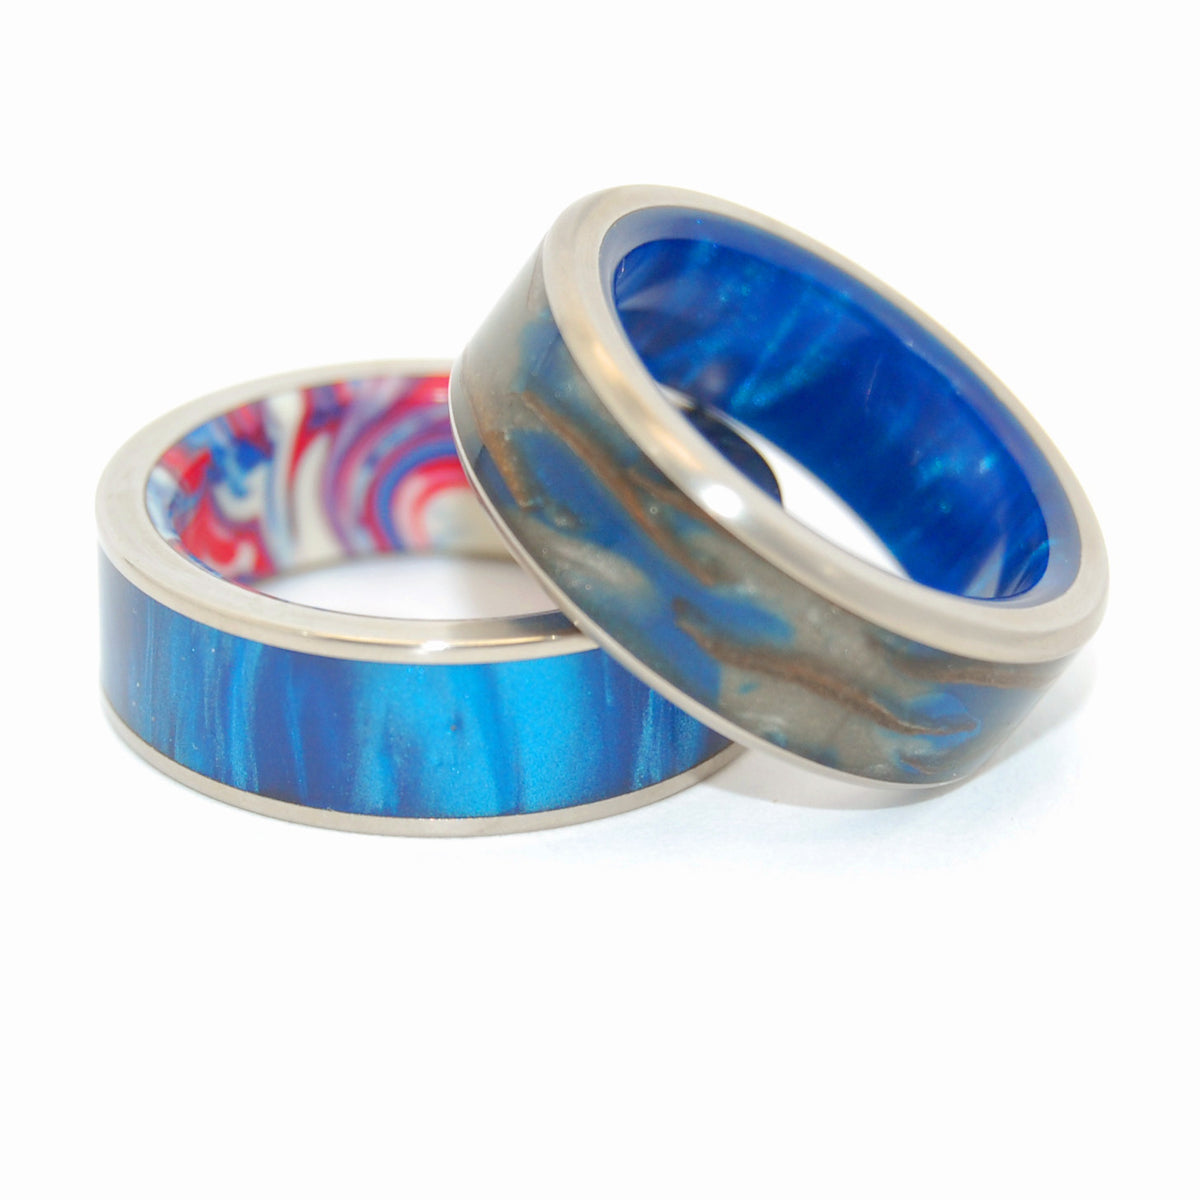 GALACTIC LOVE | Pine Cone Wood resin & Blue Marbled Opalescent - Unique Wedding Rings Set - Minter and Richter Designs